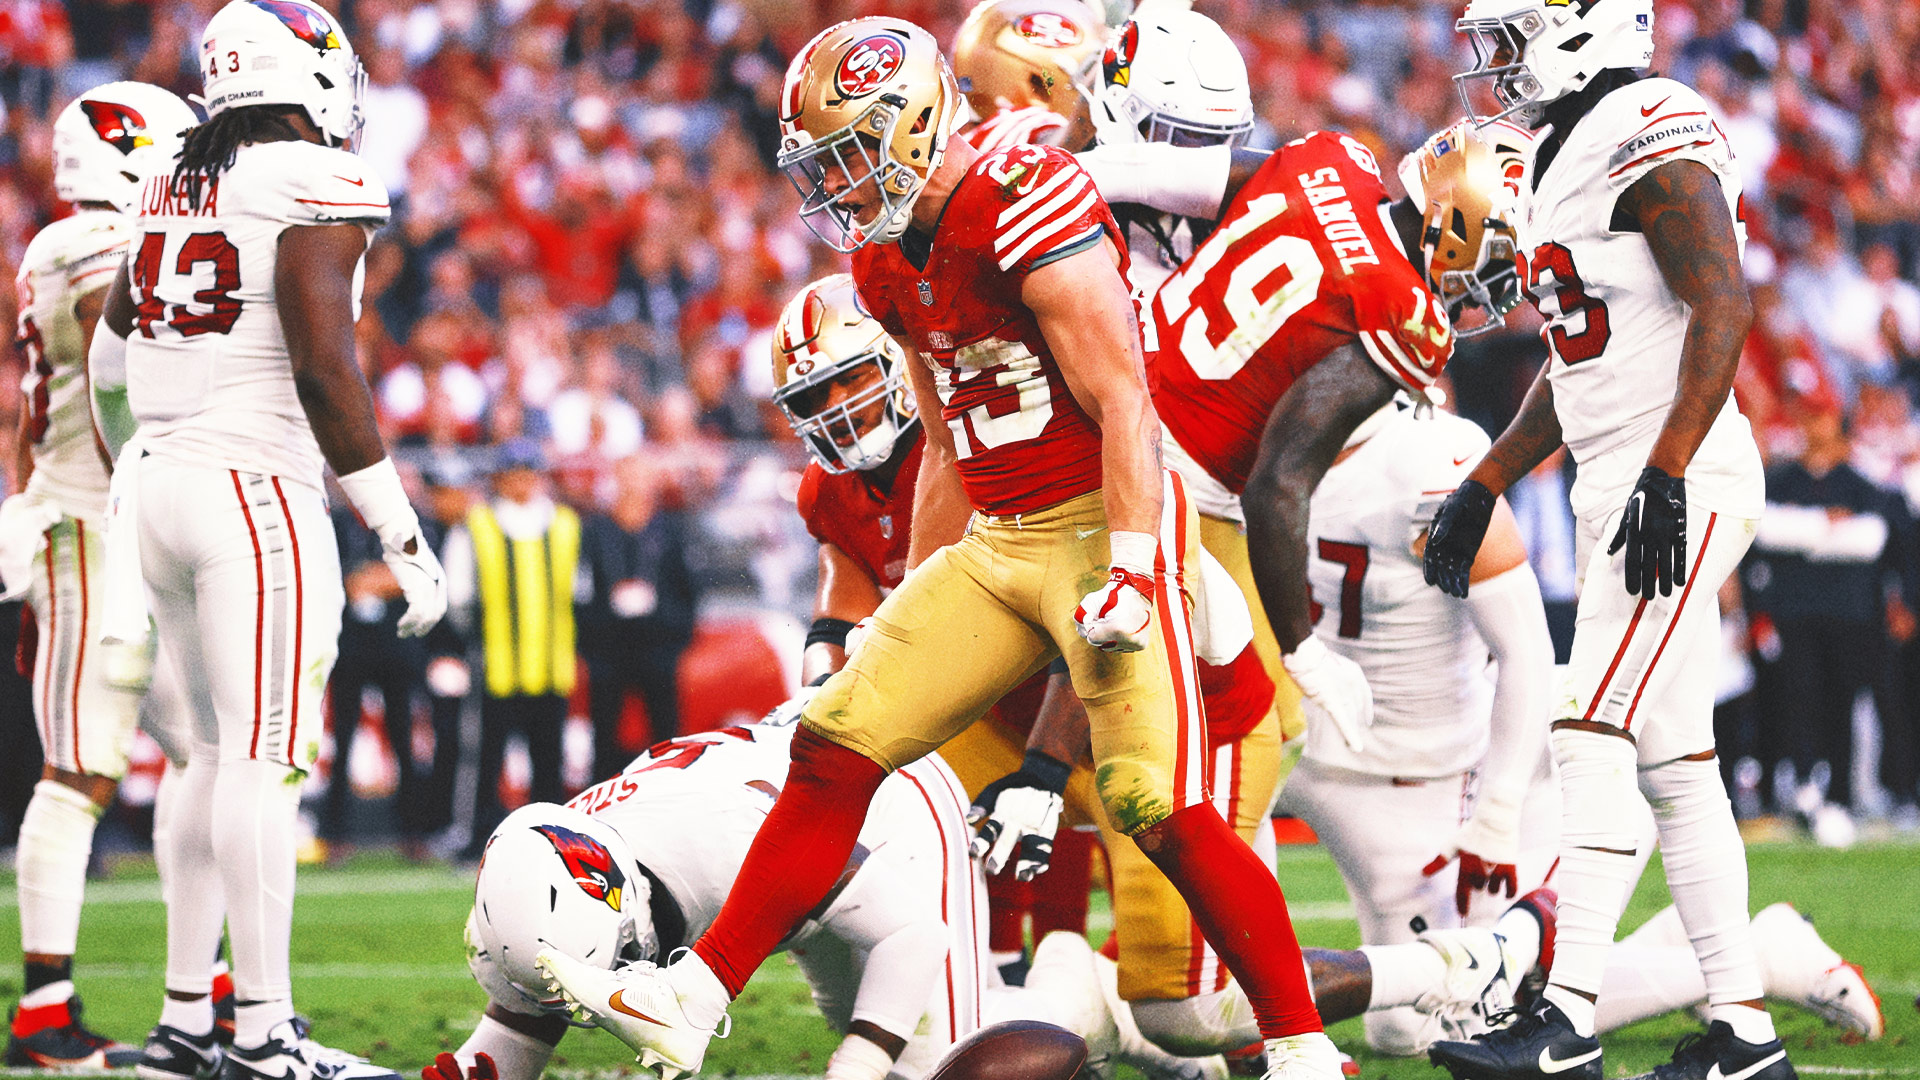 Christian McCaffrey scores 3 TDs to help 49ers roll past Cardinals 45-29